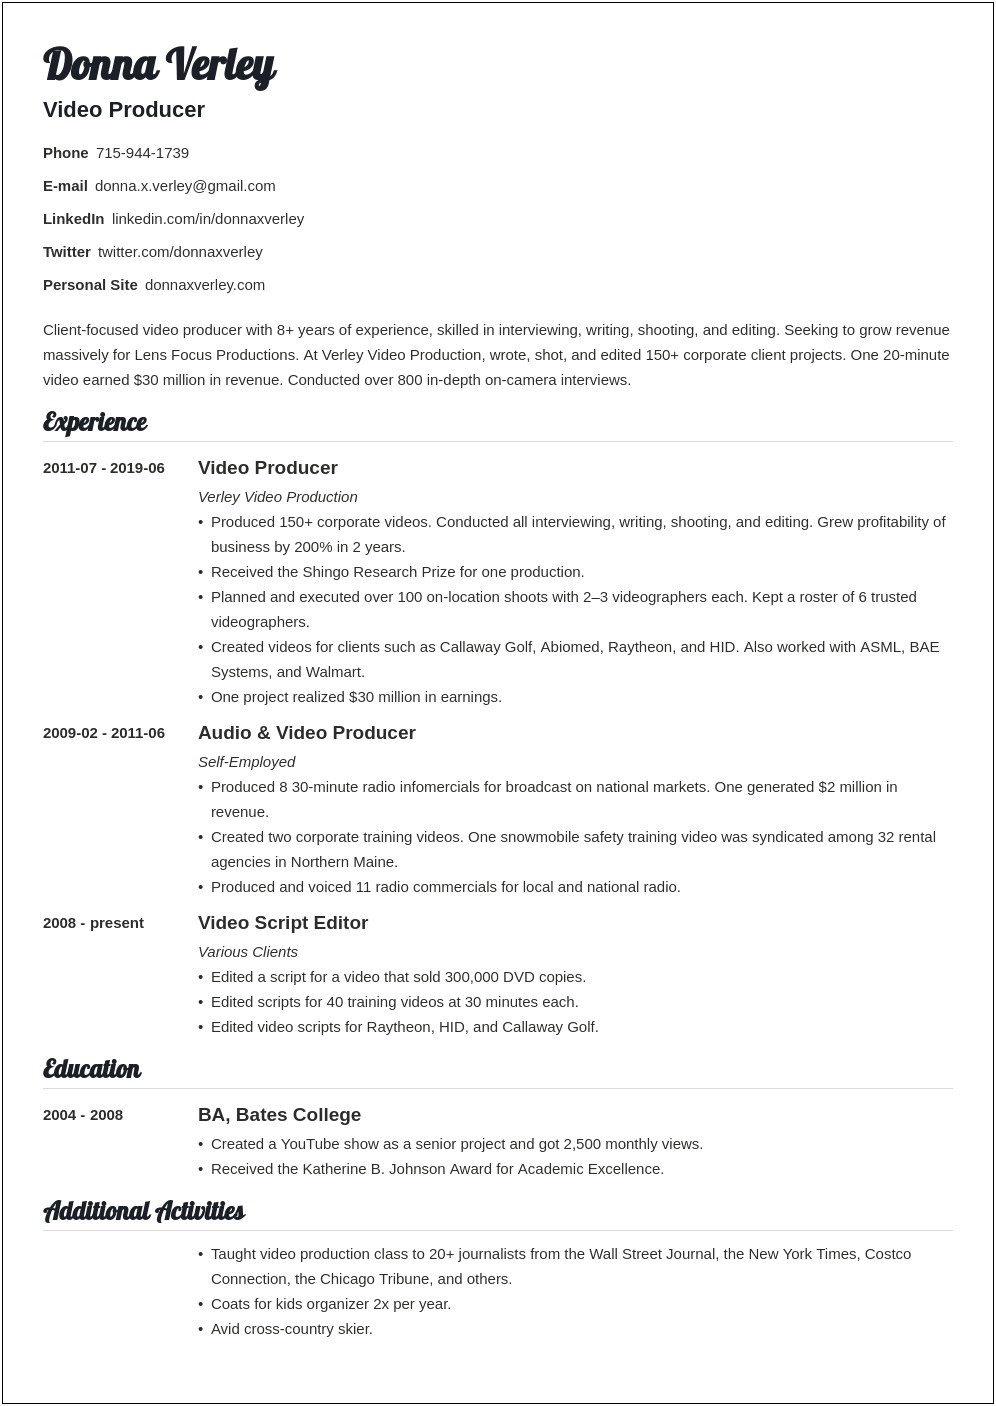 Account For Consulting And Freelance Work On Resume